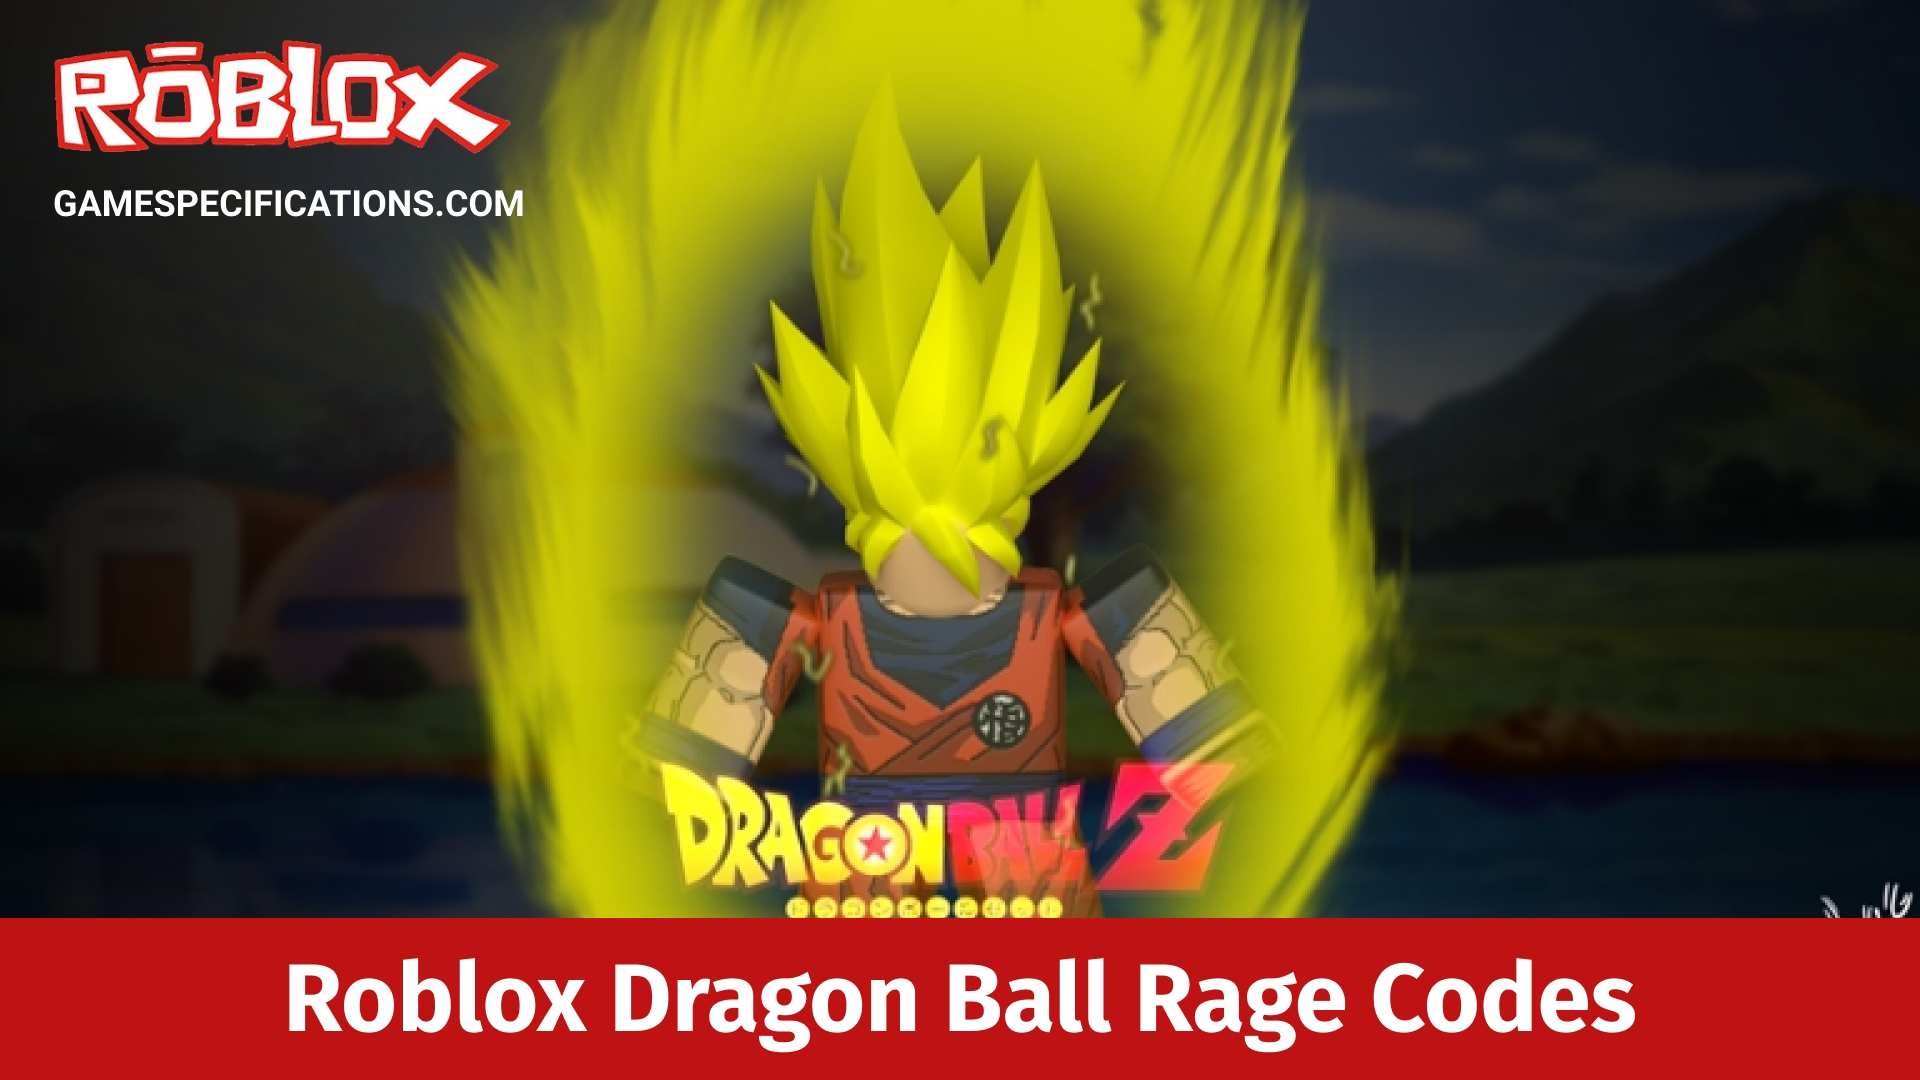 Roblox Dragon Ball Rage Codes July 2021 Game Specifications - dbz legends roblox